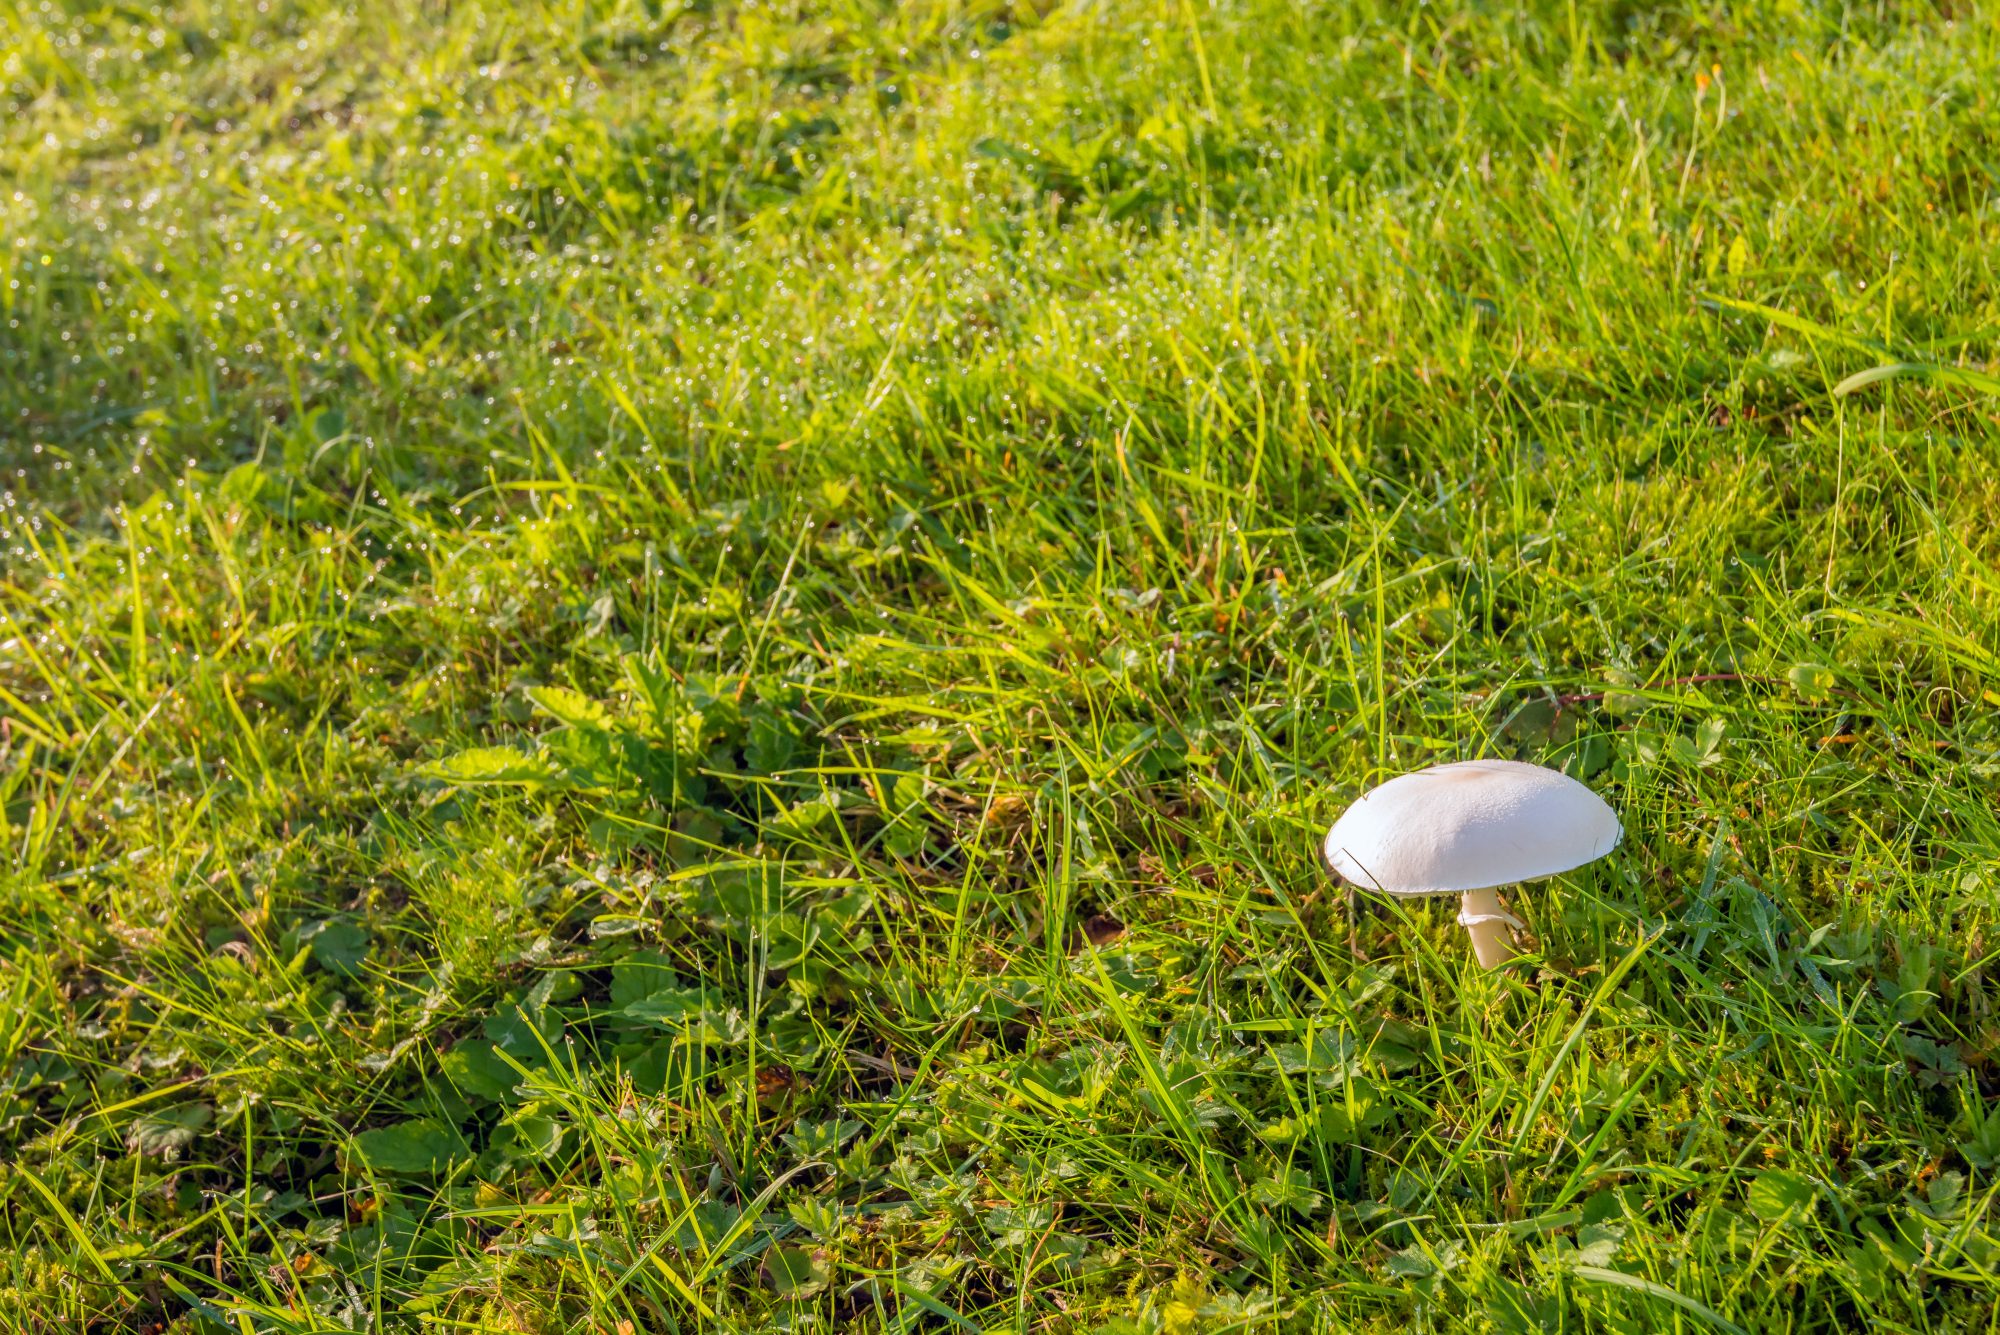 Clitocybe rivulosa, commonly known as the false champignon or fool`s funnel, is a poisonous basidiomycete fungus of the large genus Clitocybe. Also known as the sweating mushroom, it derives this name from the symptoms of poisoning. White mushroom growing in grass